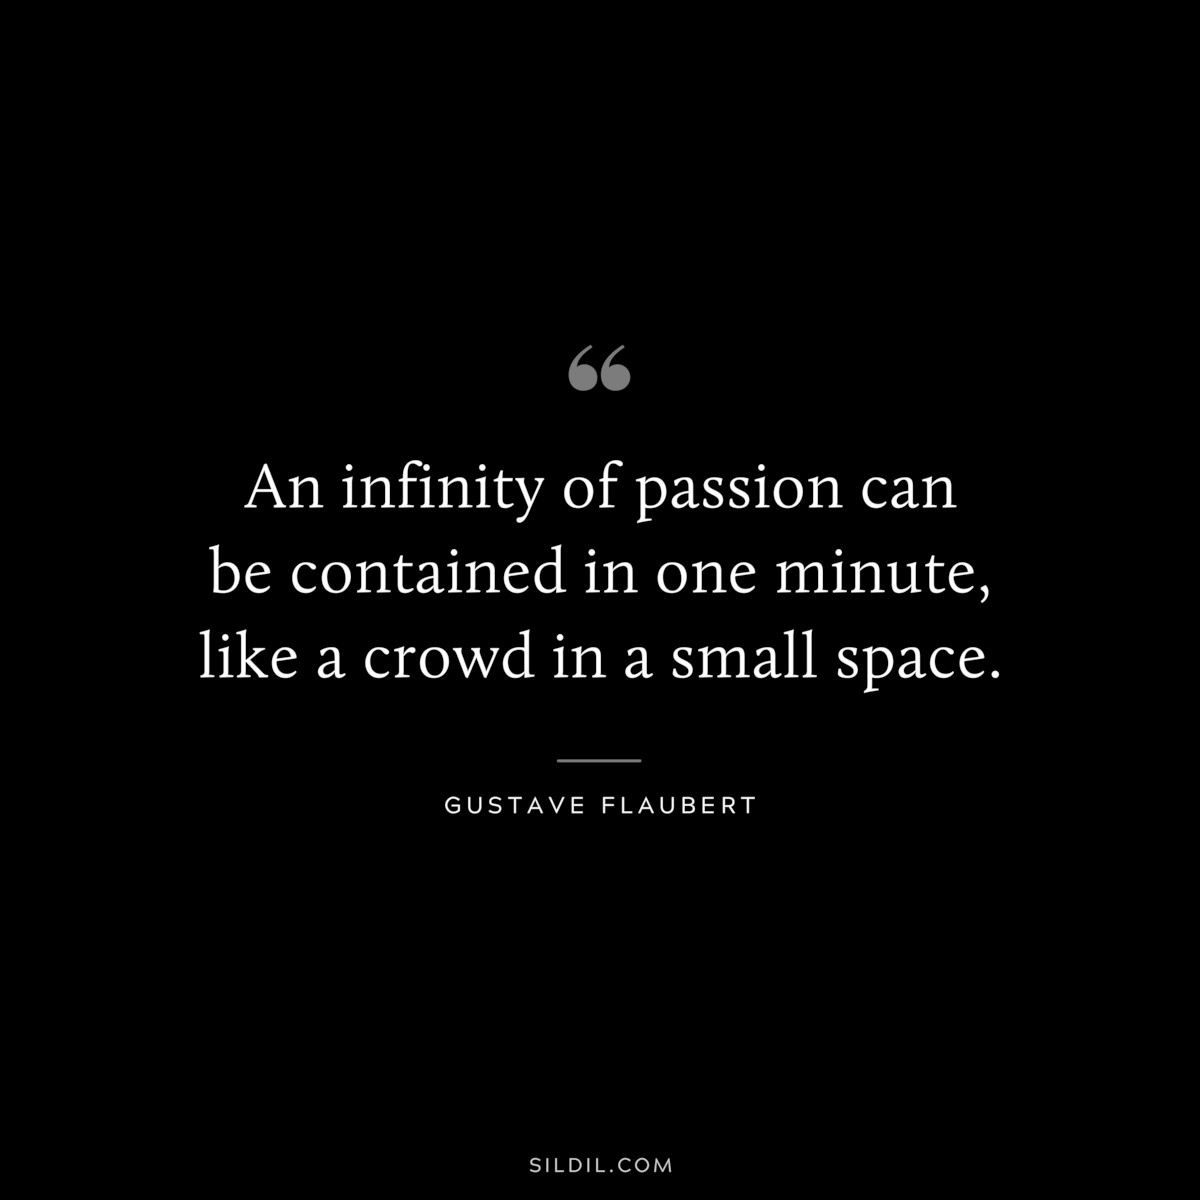 An infinity of passion can be contained in one minute, like a crowd in a small space. ― Gustave Flaubert